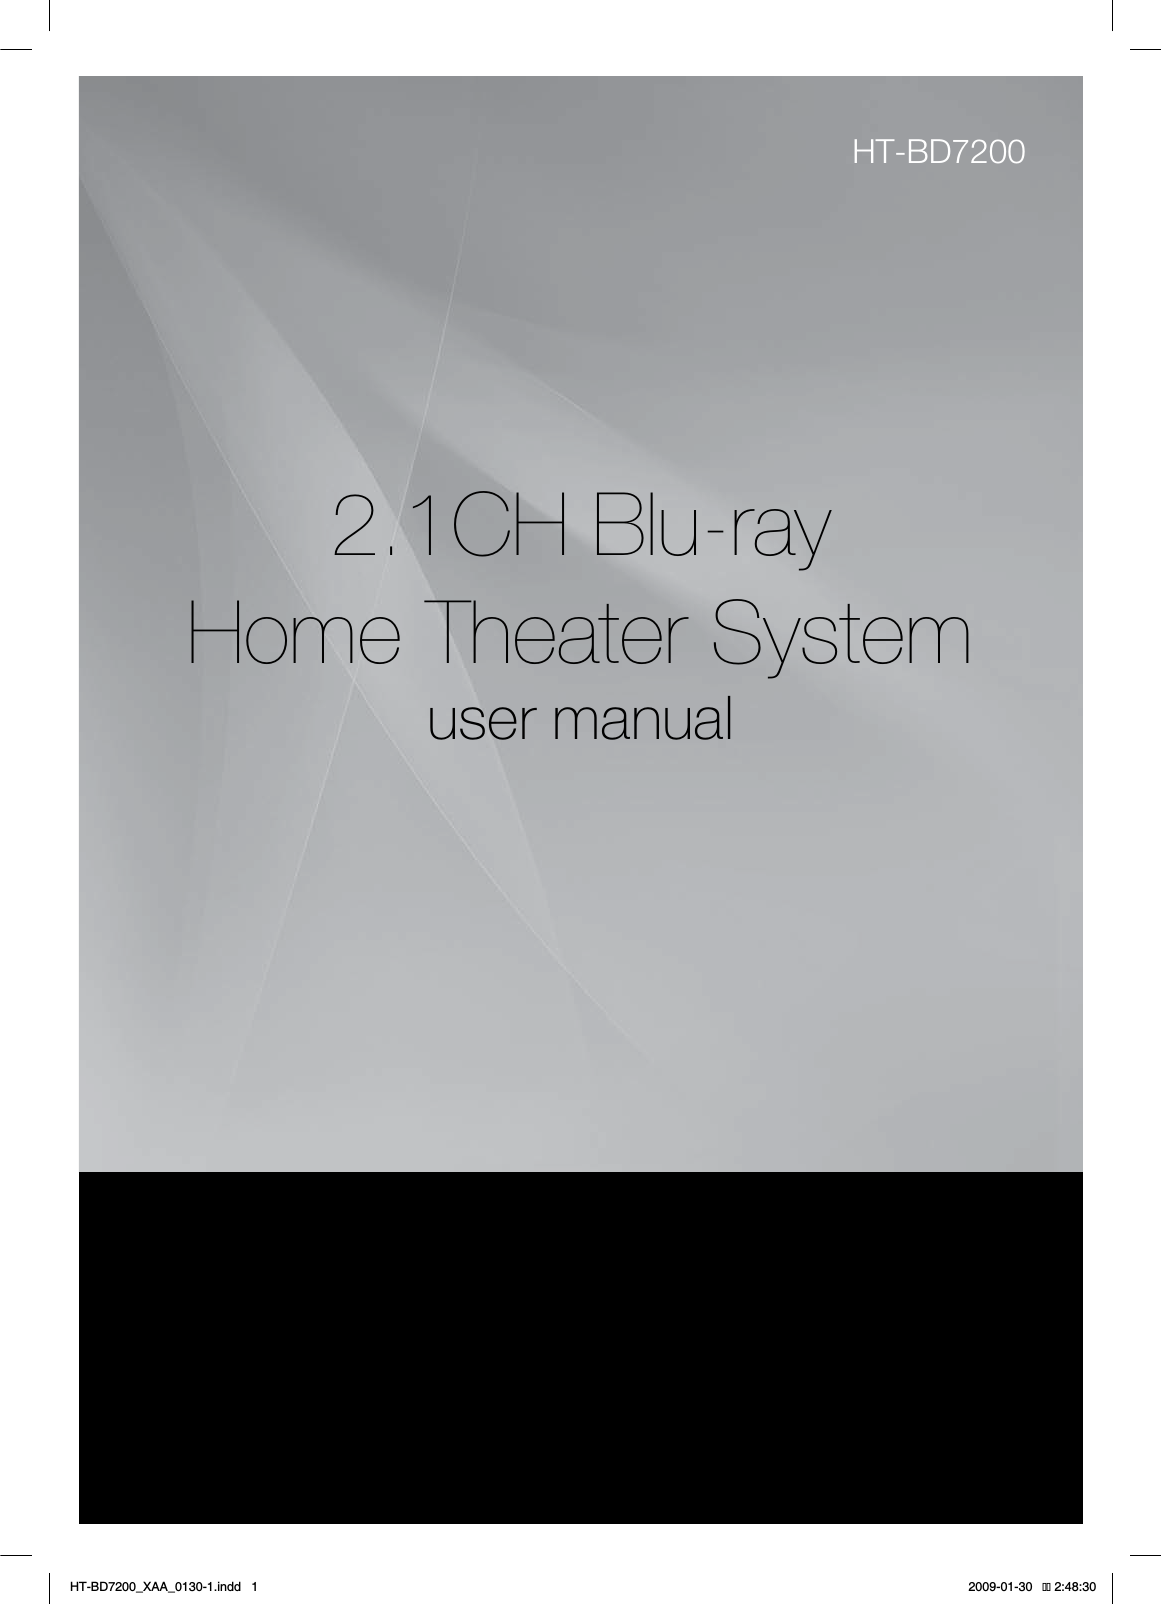 2.1CH Blu-rayHome Theater Systemuser manualimagine the possibilitiesThank you for purchasing this Samsung product.To receive more complete service, please register your product atwww.samsung.com/registerHT-BD7200HT-BD7200_XAA_0130-1.indd   1 